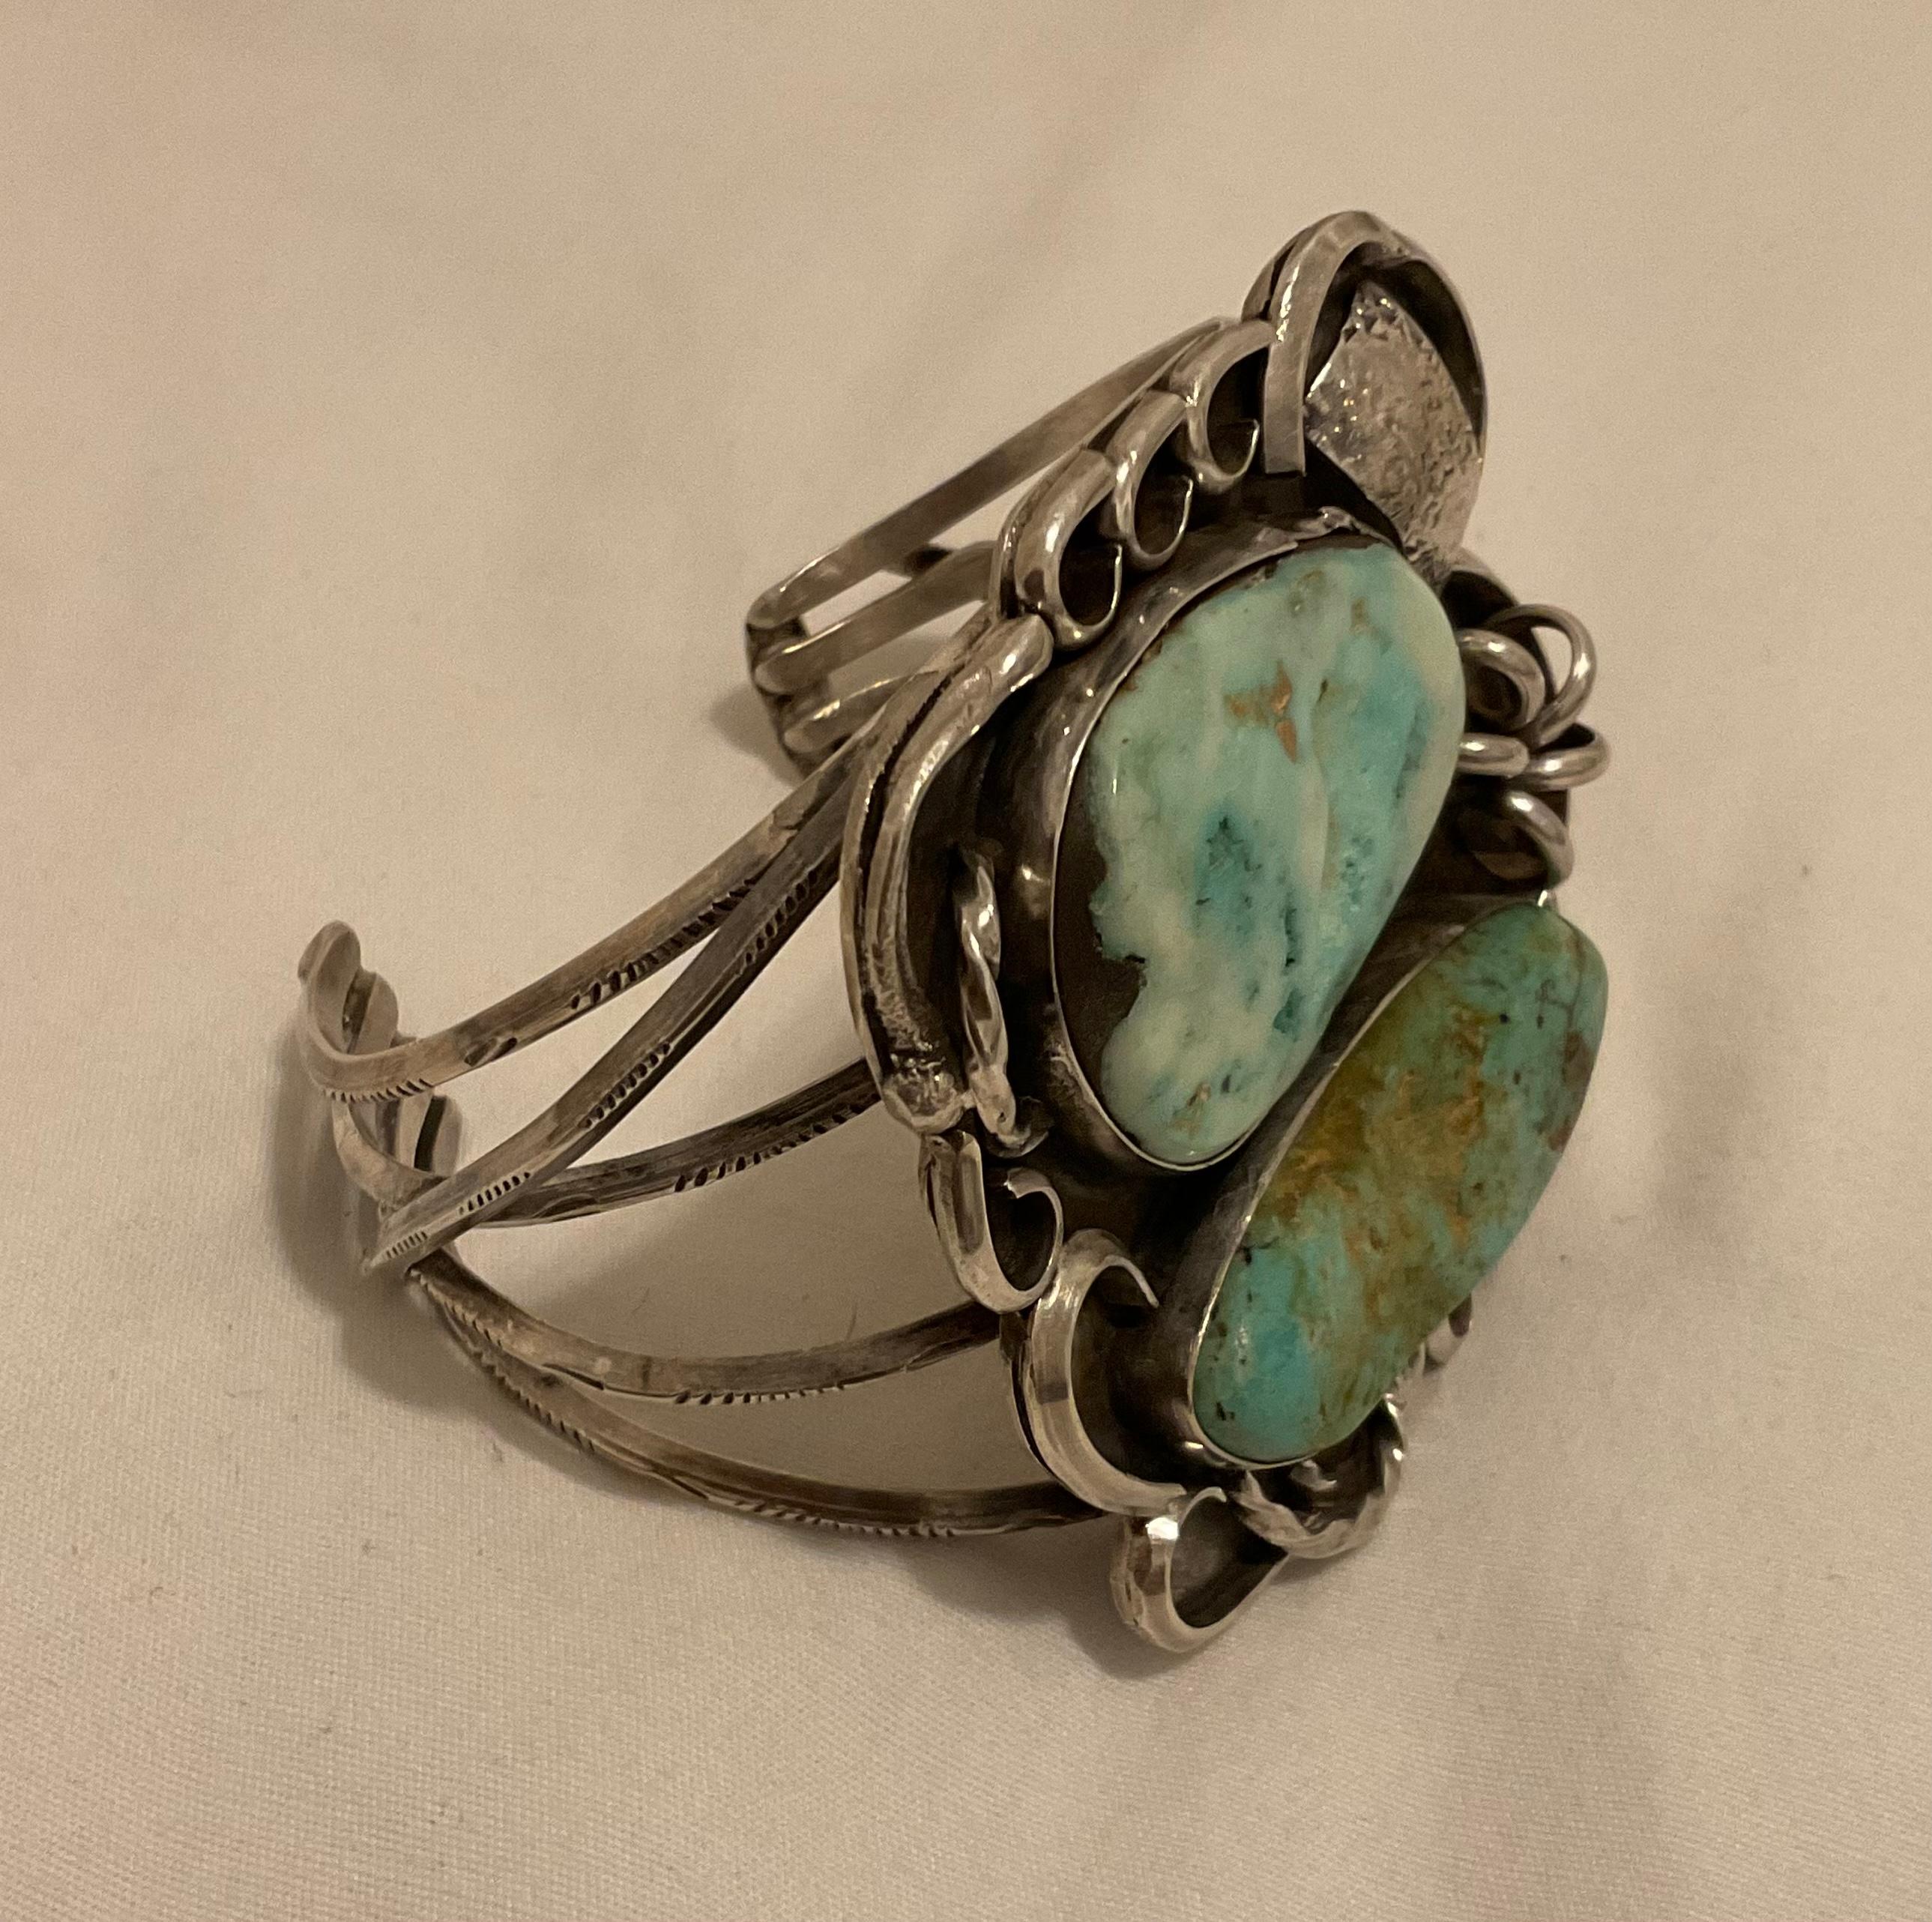 Native American Early 20th Century Turquoise Mountain Bird's Eye Sterling Silver Cuff Bracelet